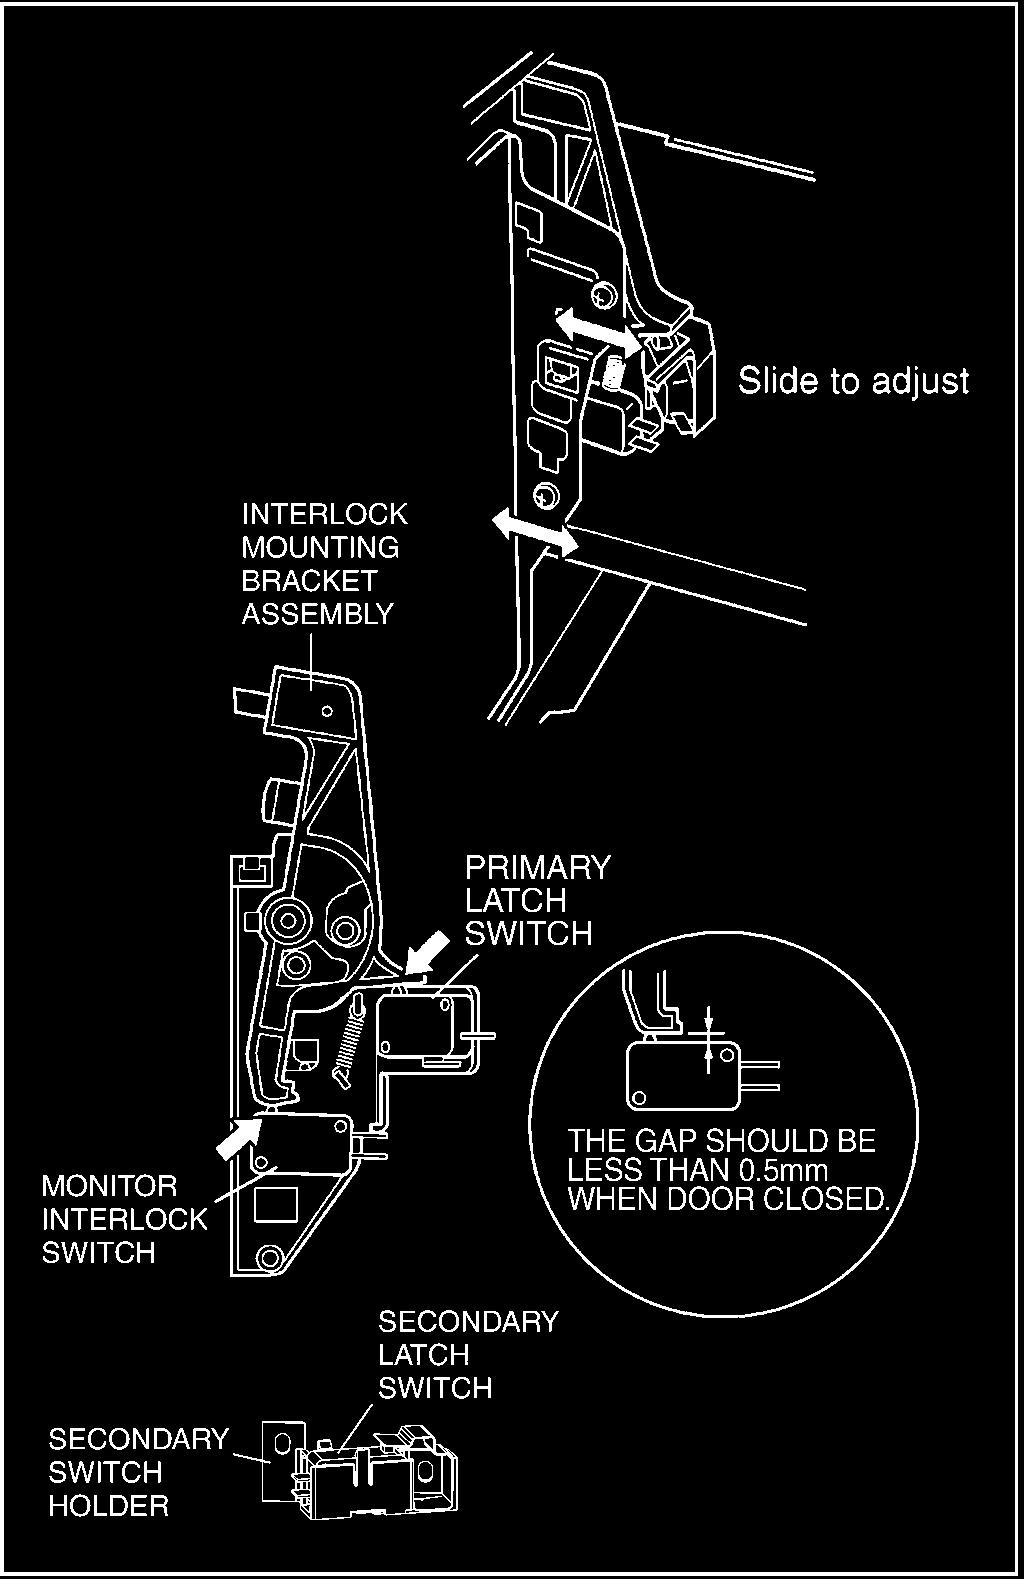 Mount the secondary latch switch to secondary switch holder as shown in illustration.